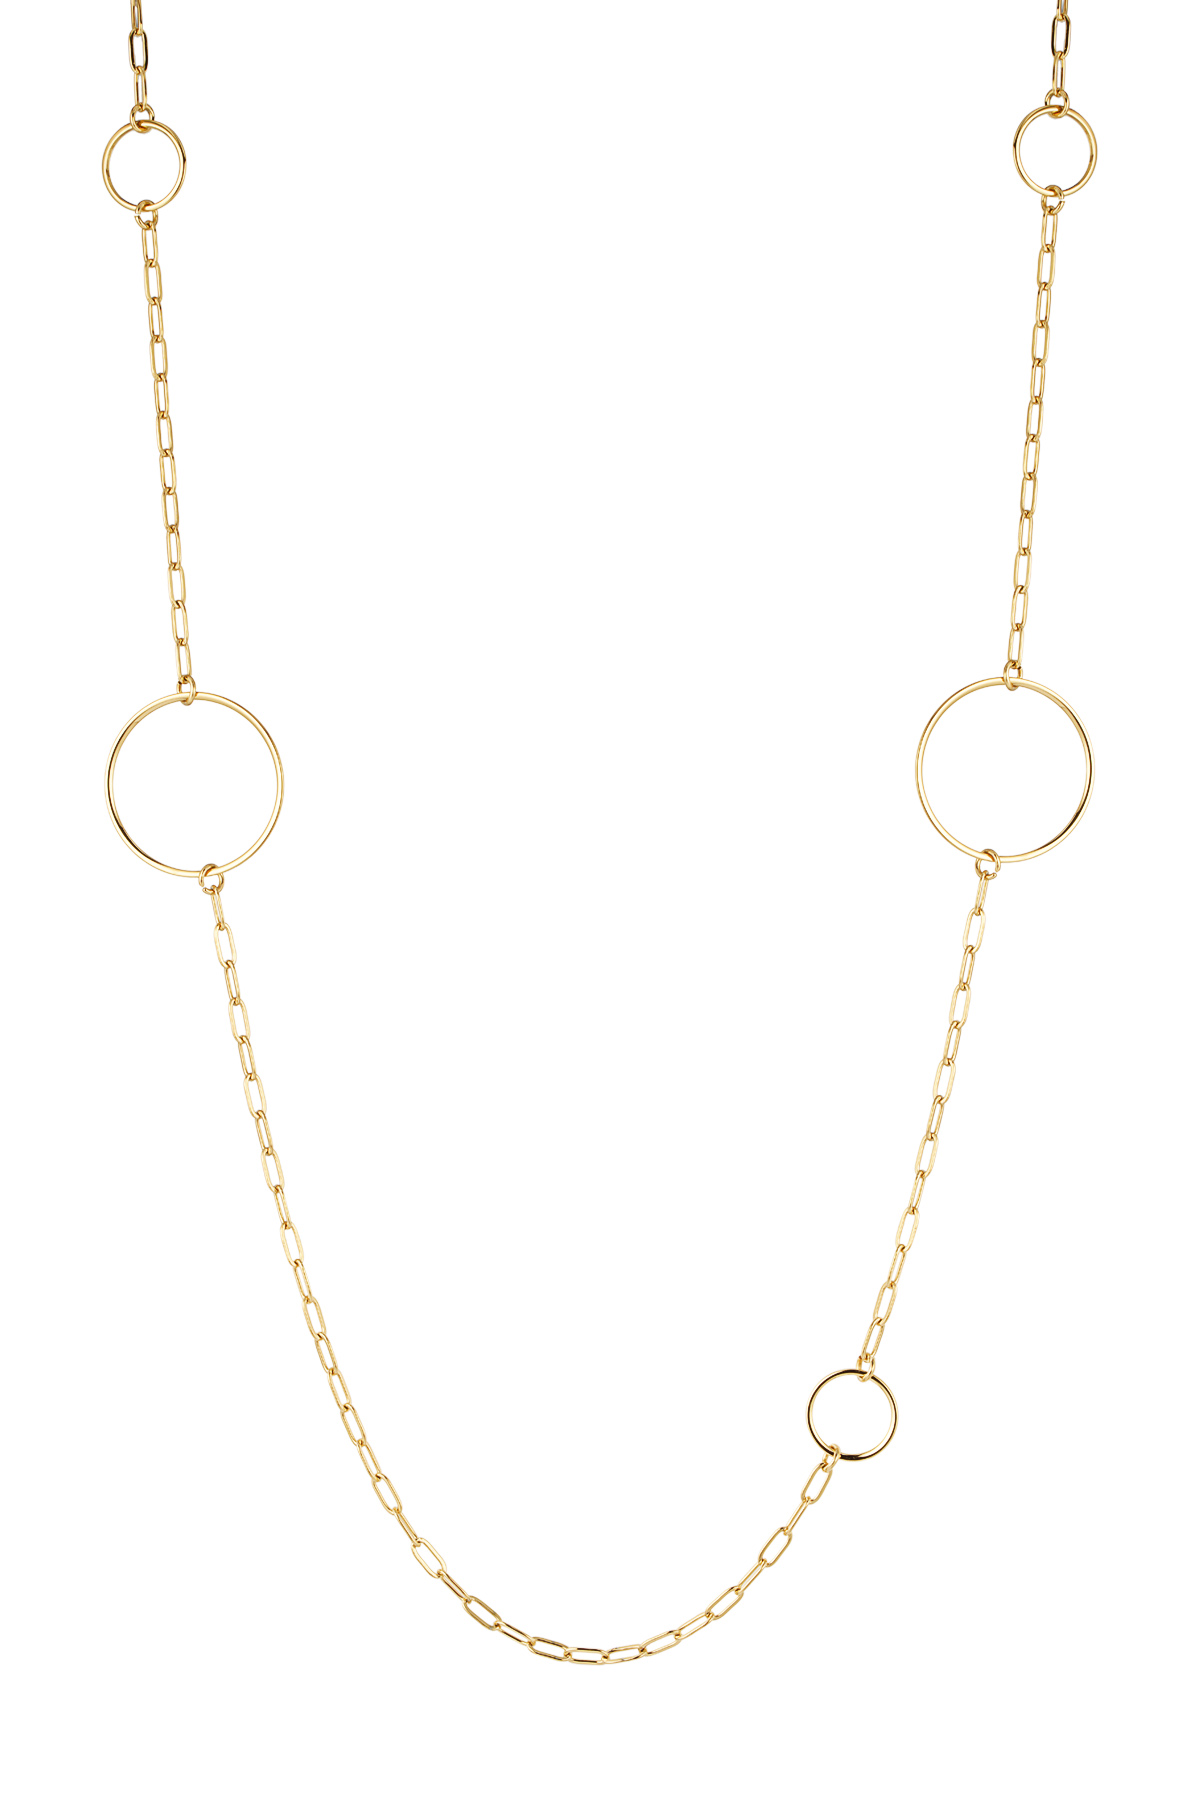 Long necklace with various oval charms - gold 